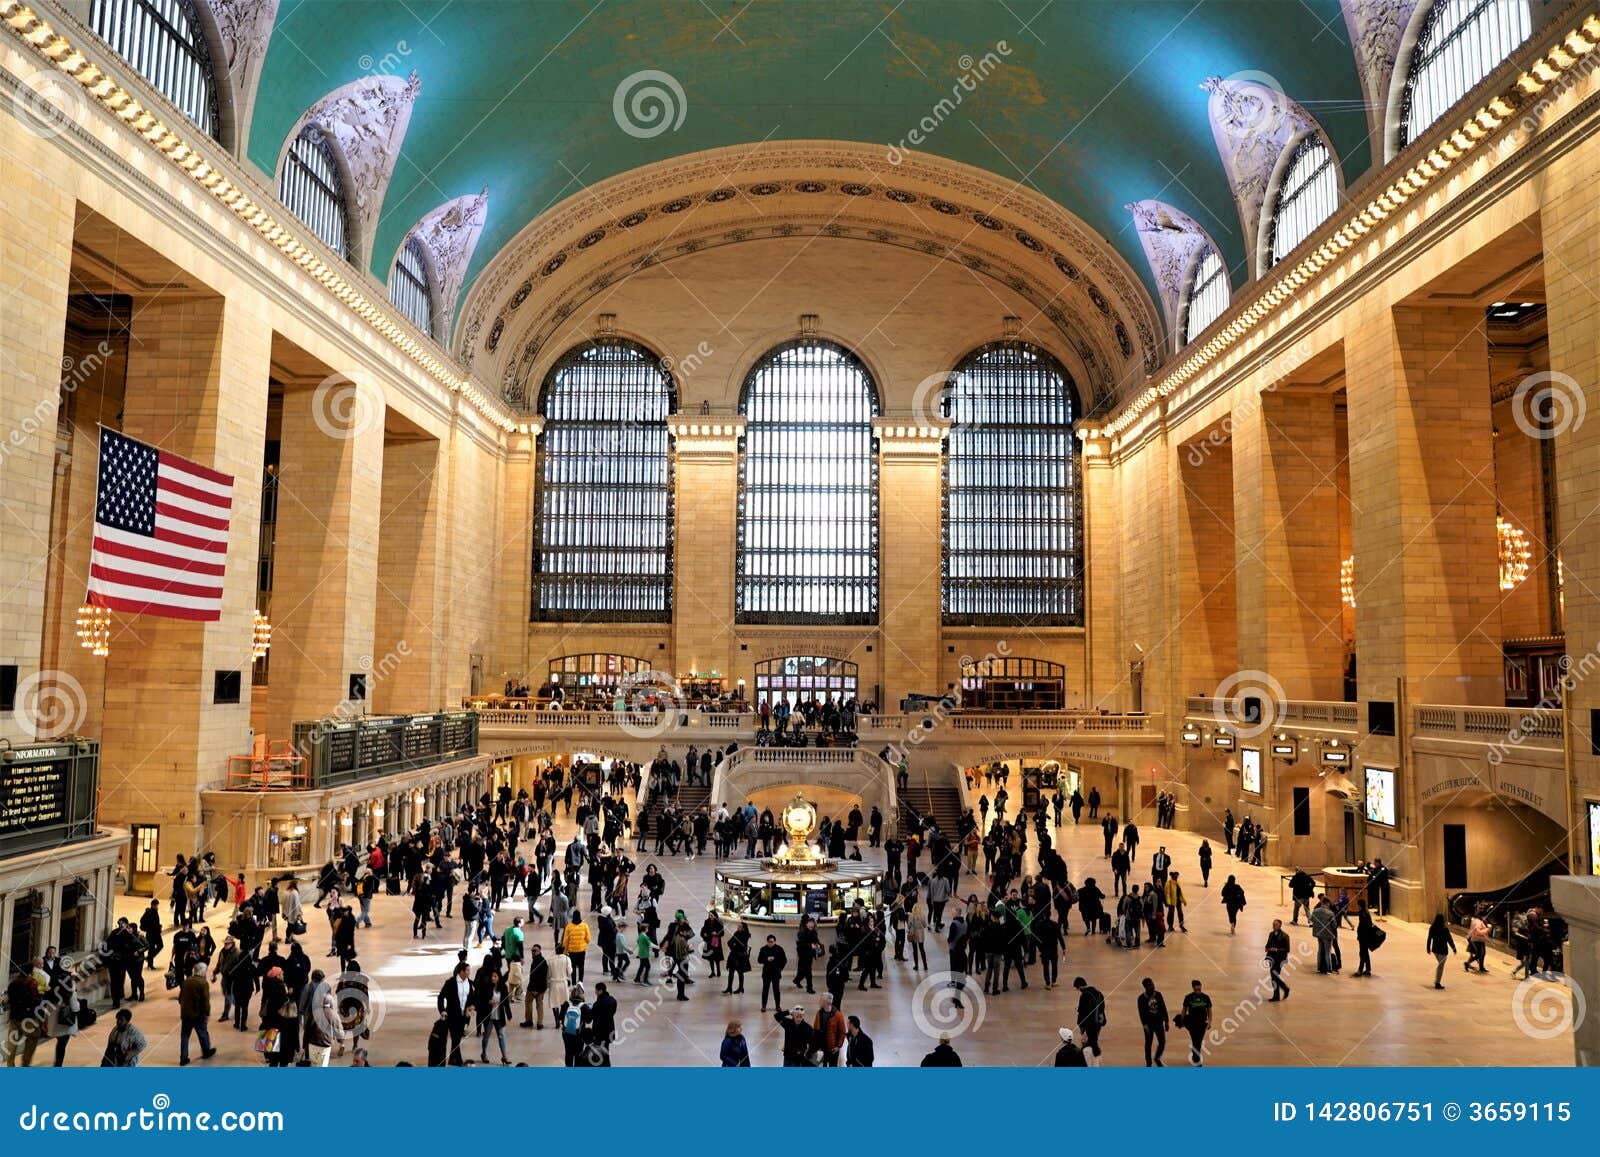 Interior Of Main Concourse Of Grand Central Terminal With